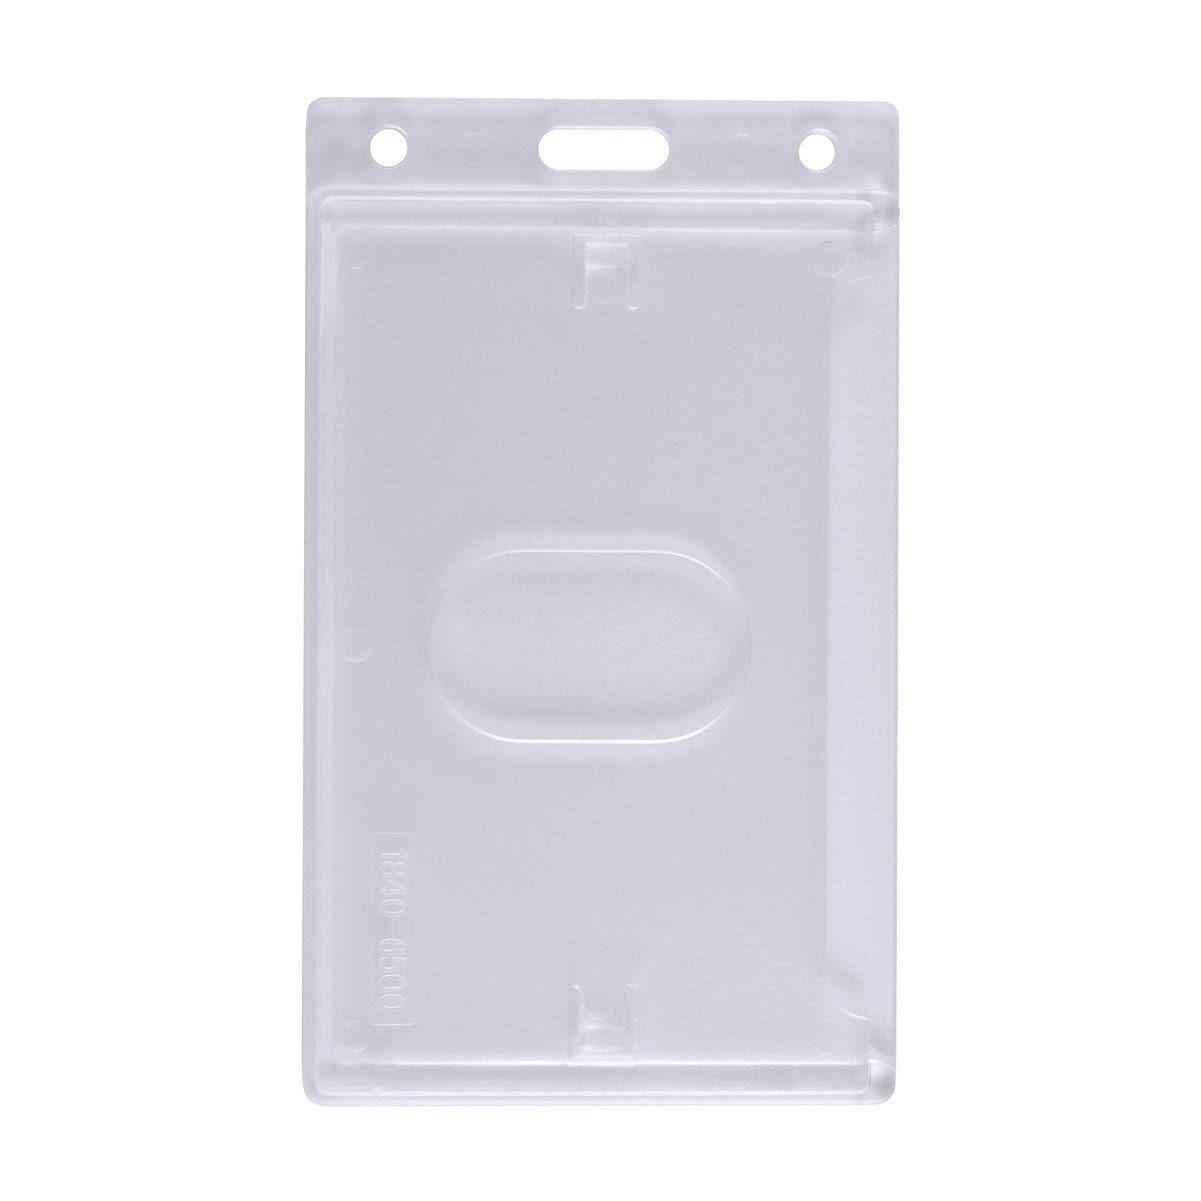 Frosted Vertical Rigid Plastic Card Holder (P/N 1840-6500) 1840-6500